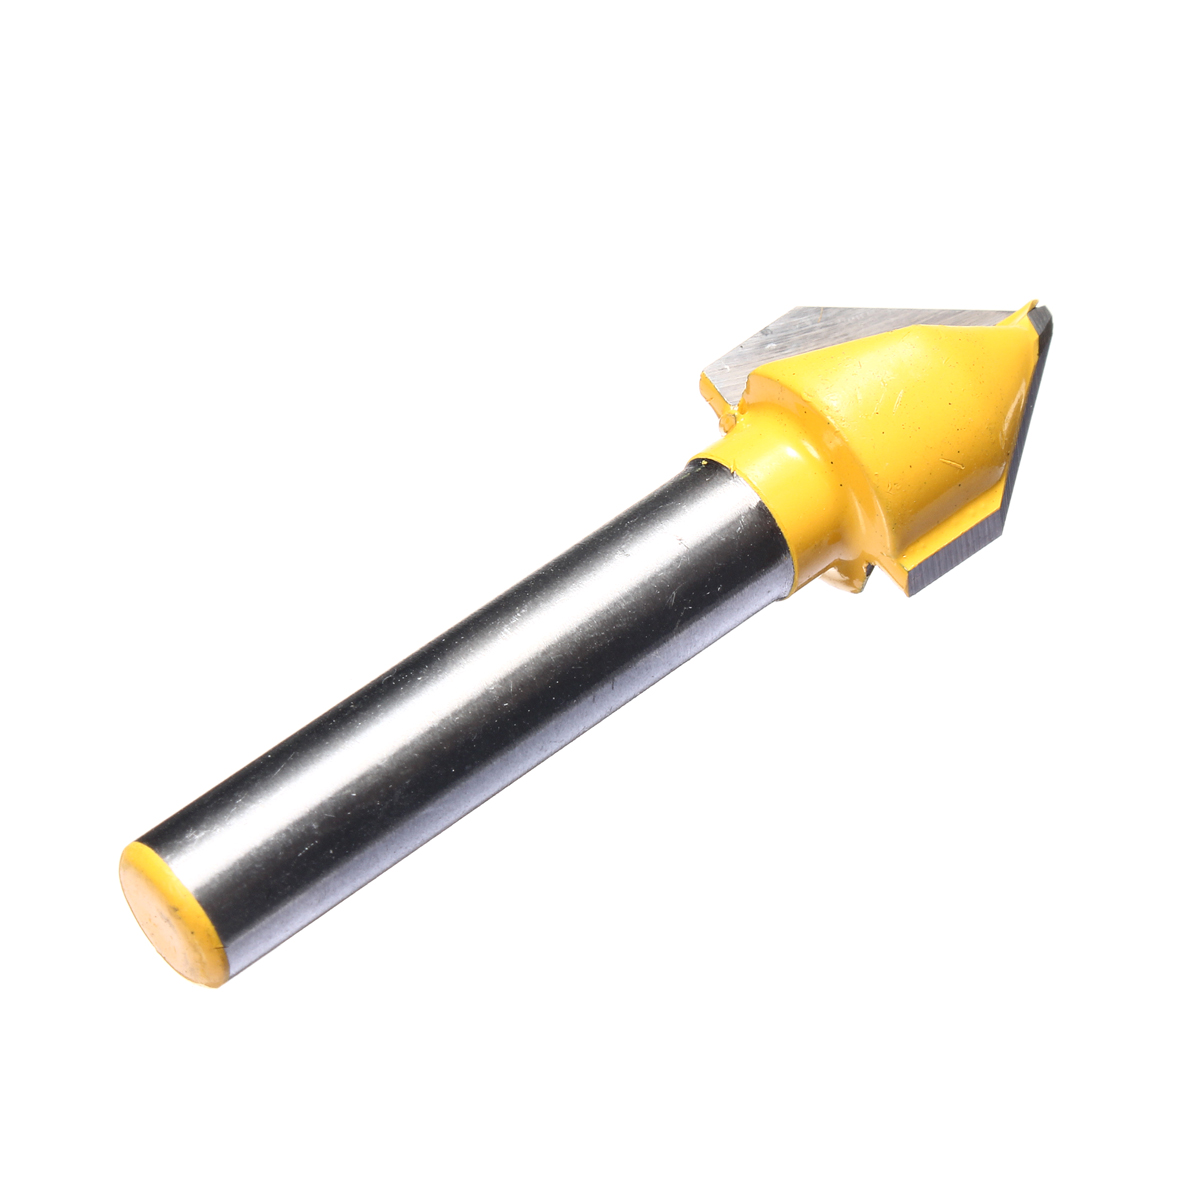 14-Inch-Shank-60-Degree-V-Groove-Router-Bit-Carbide-Tipped-Hardwood-Cutting-Cutter-1291376-5